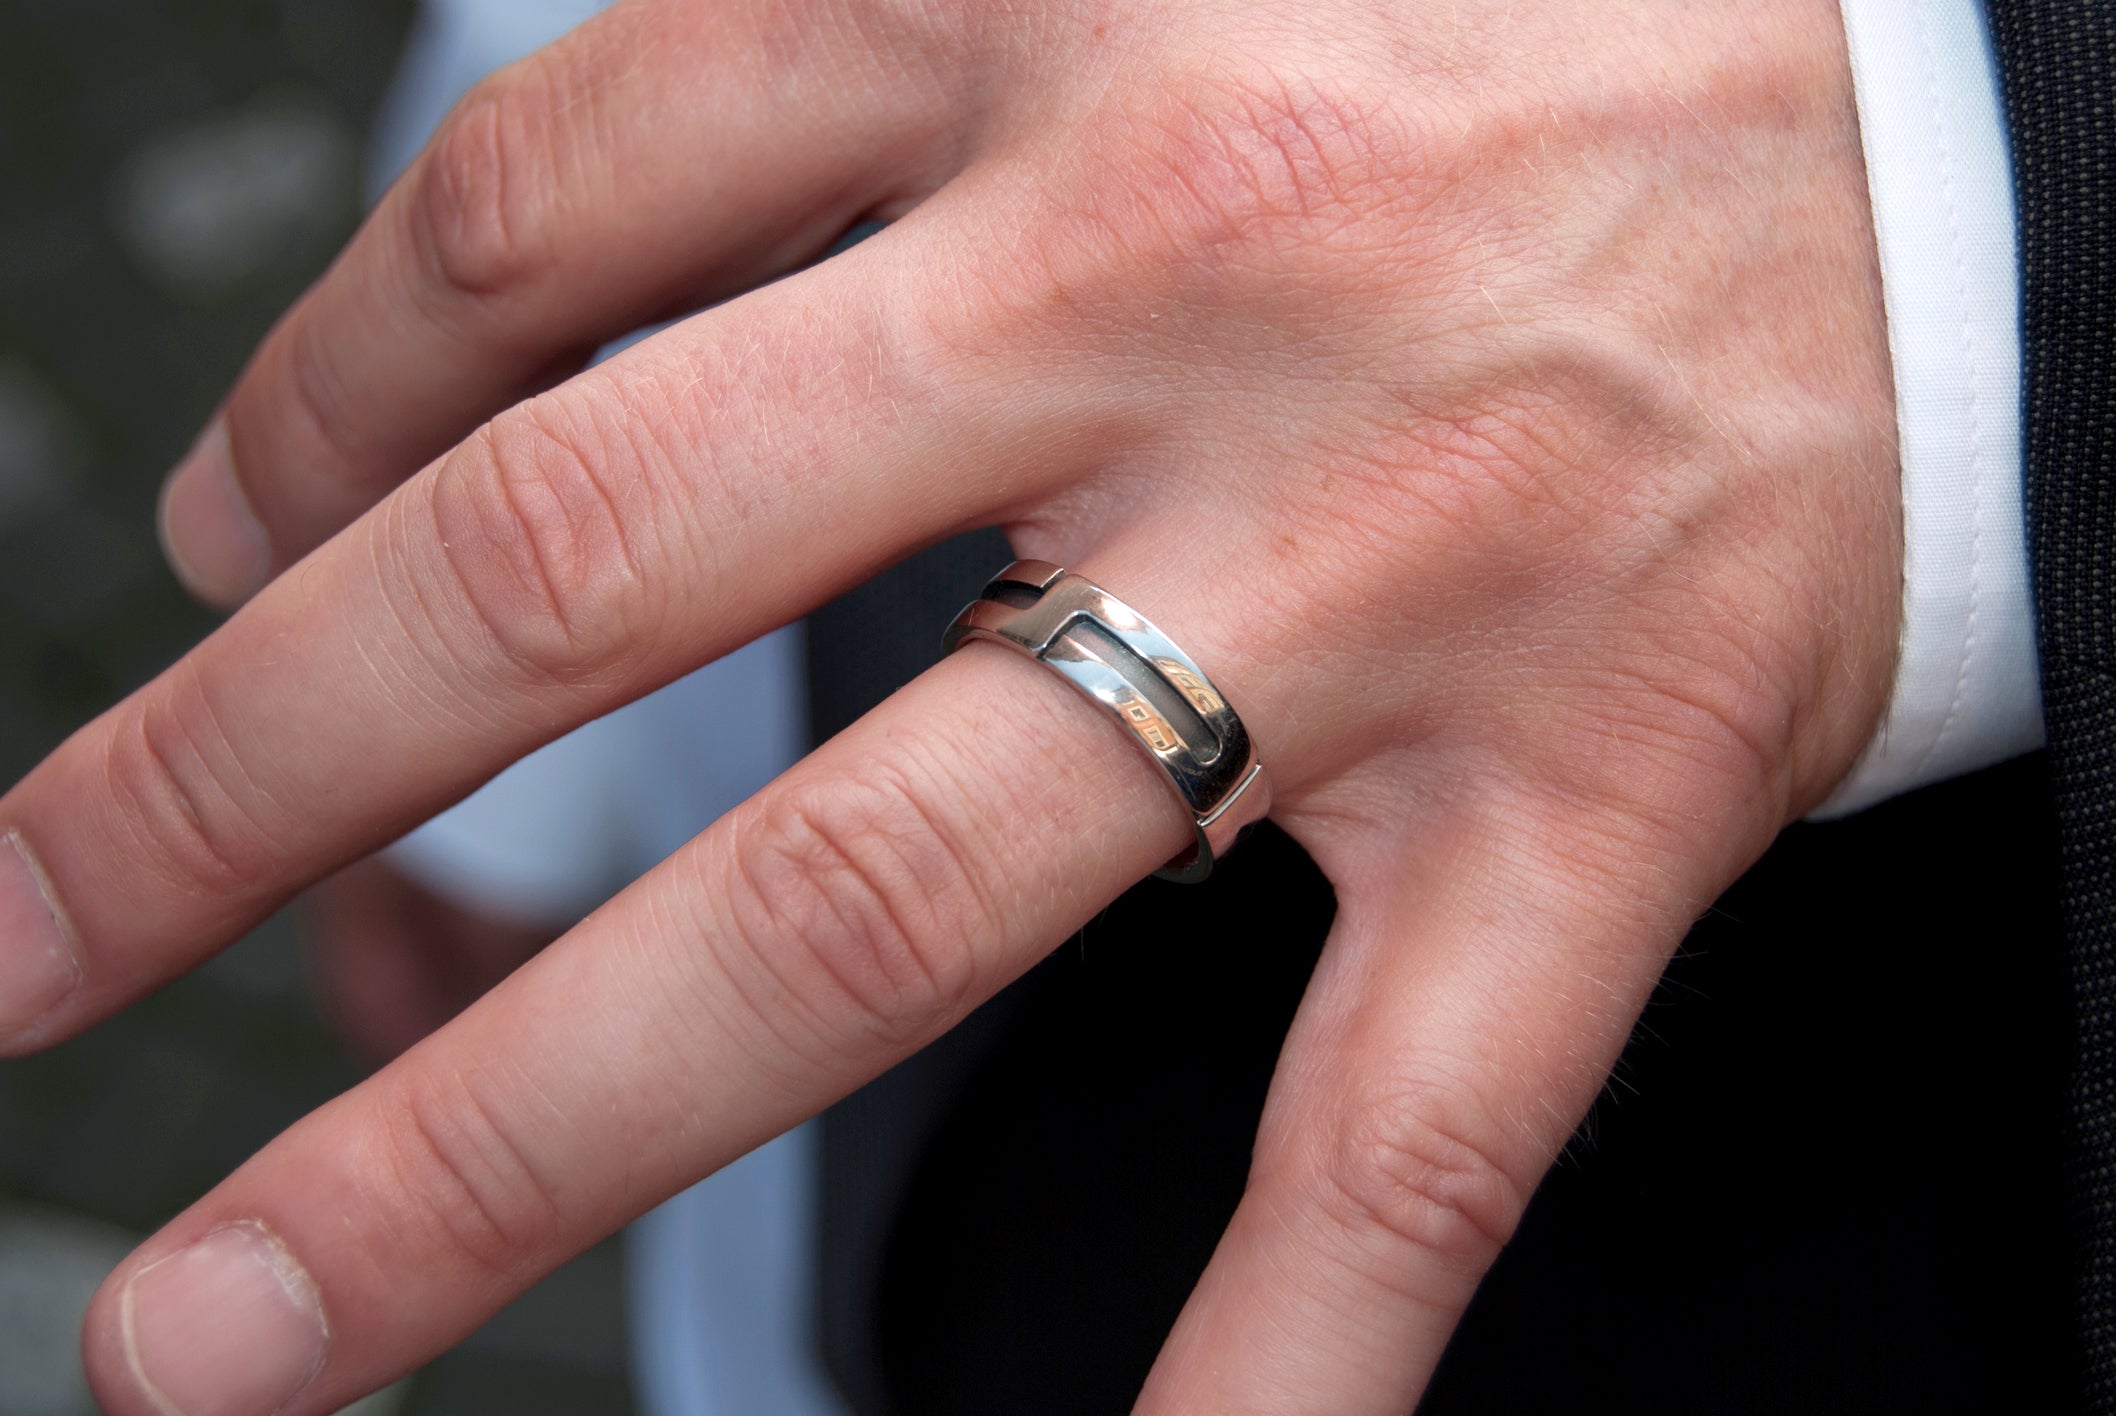 How Should a Wedding Ring Fit?